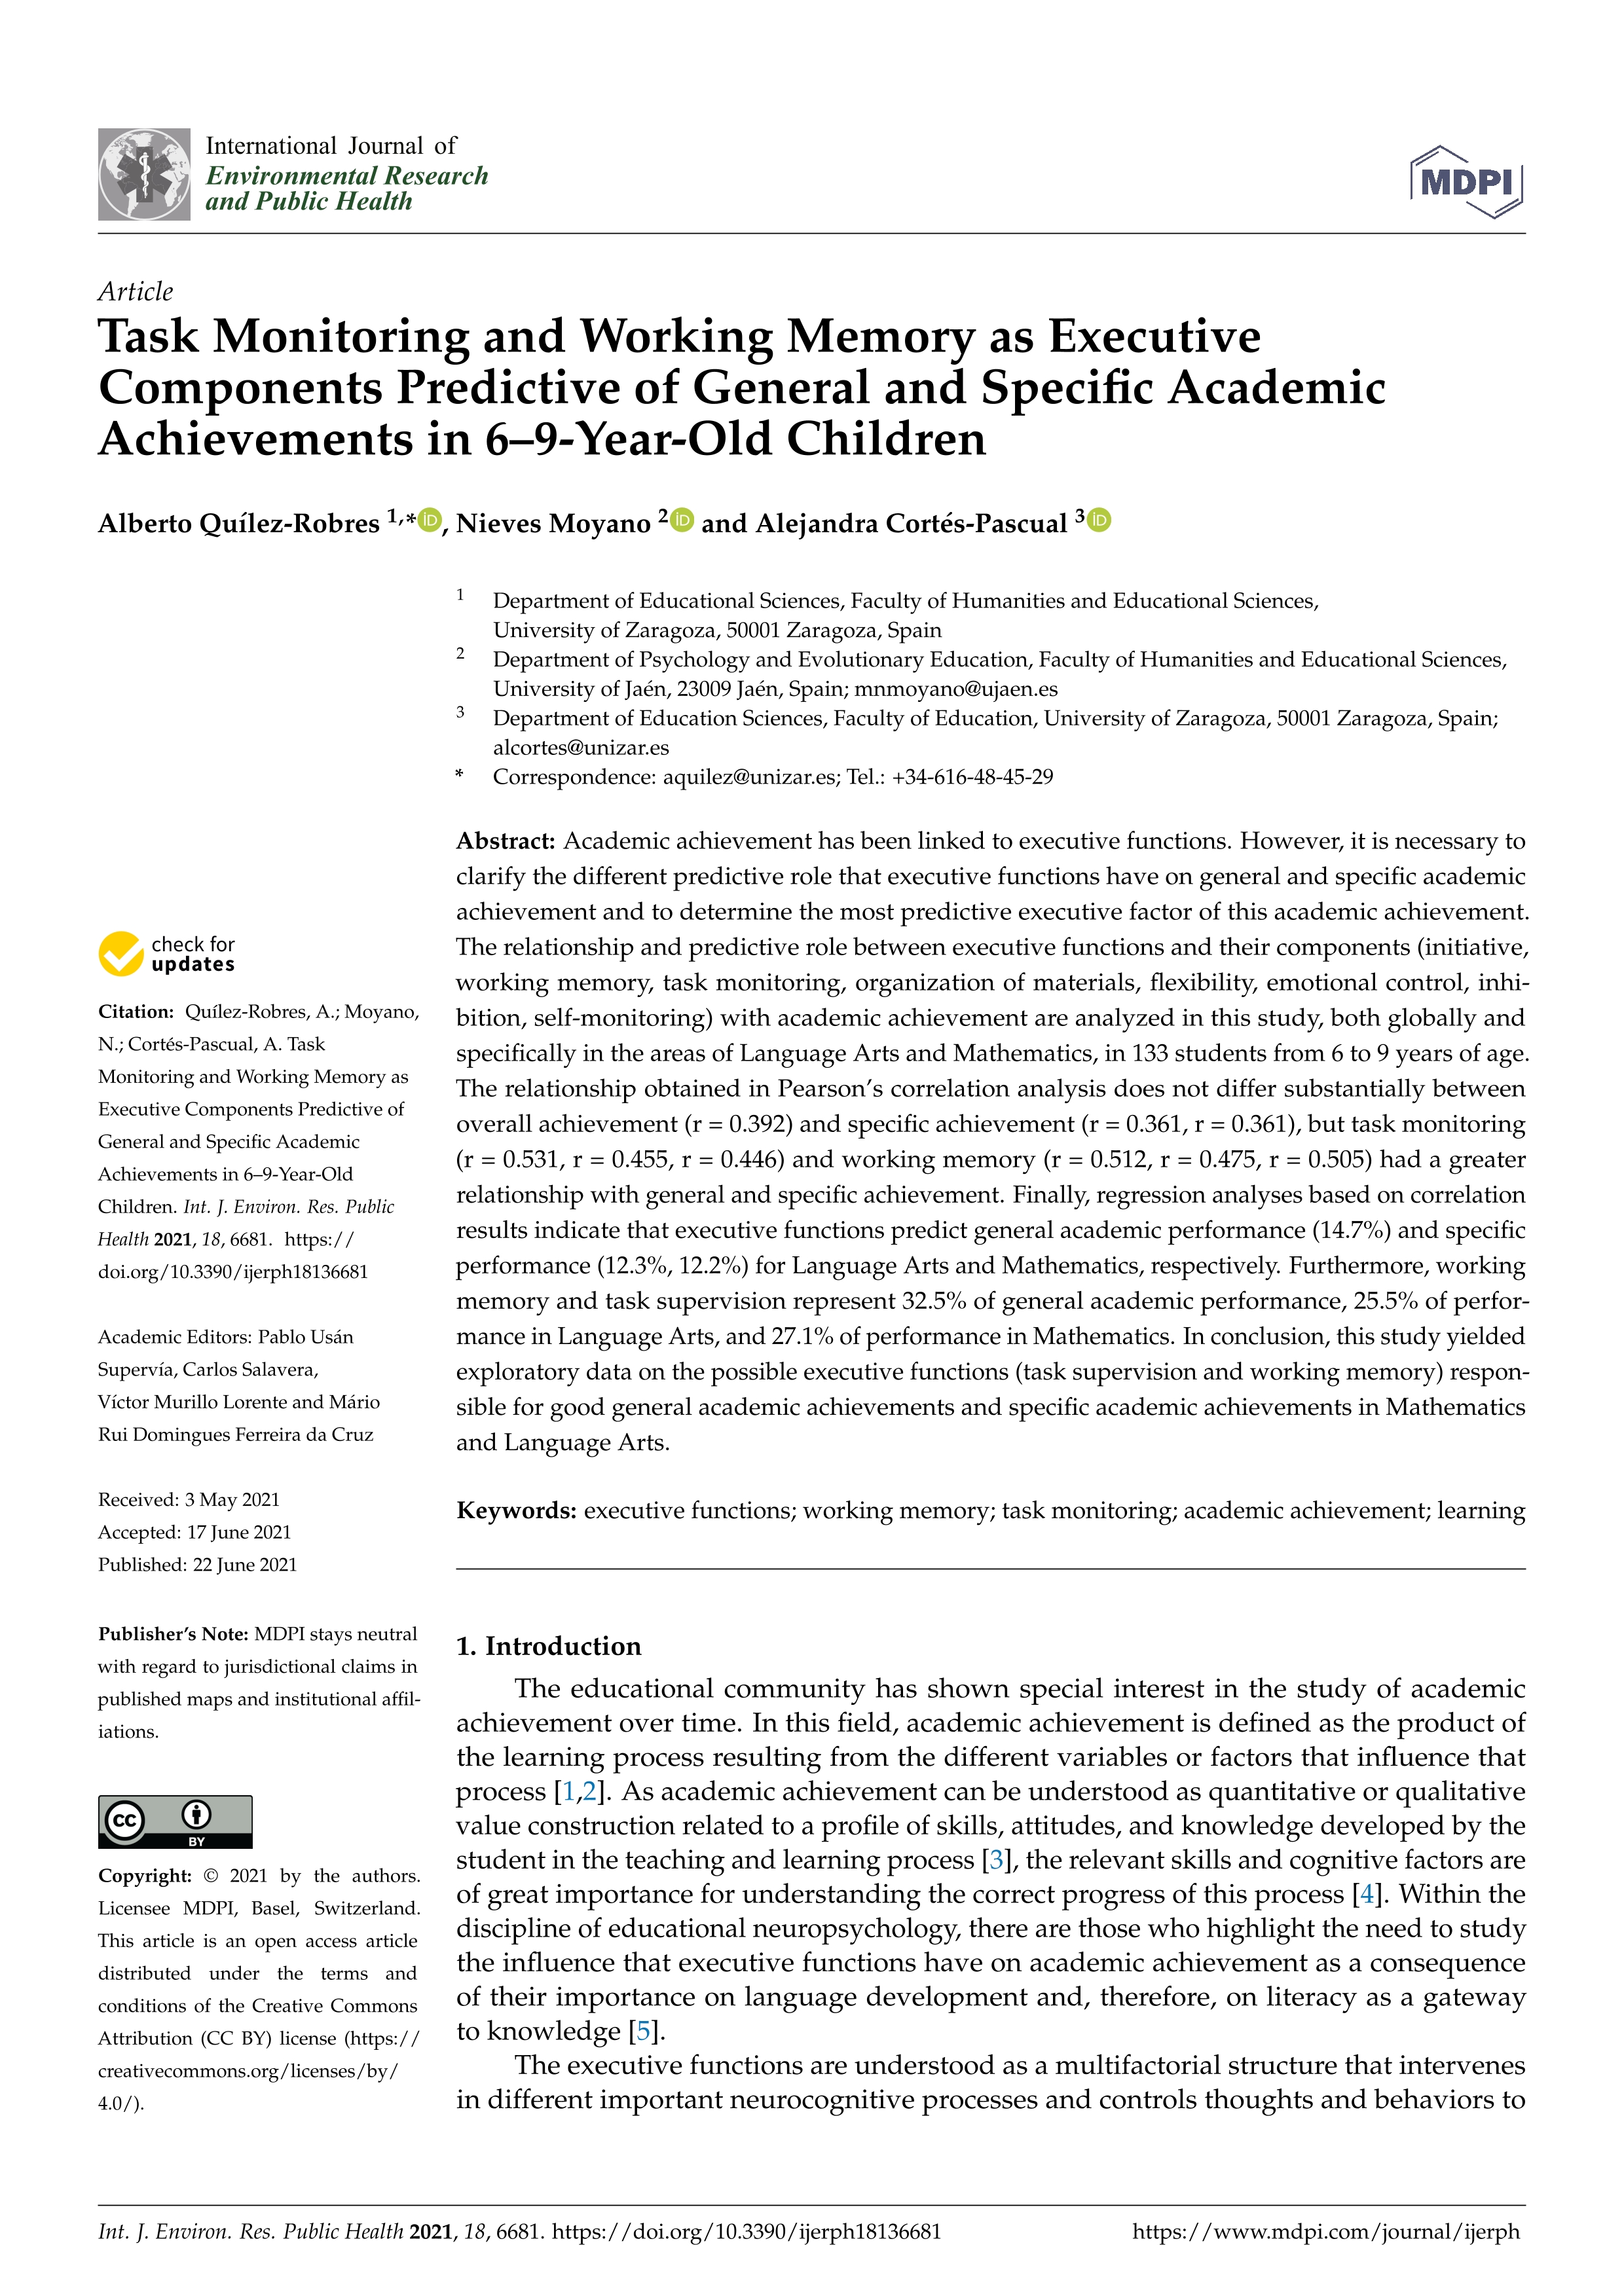 Task monitoring and working memory as executive components predictive of general and specific academic achievements in 6–9-year-old children